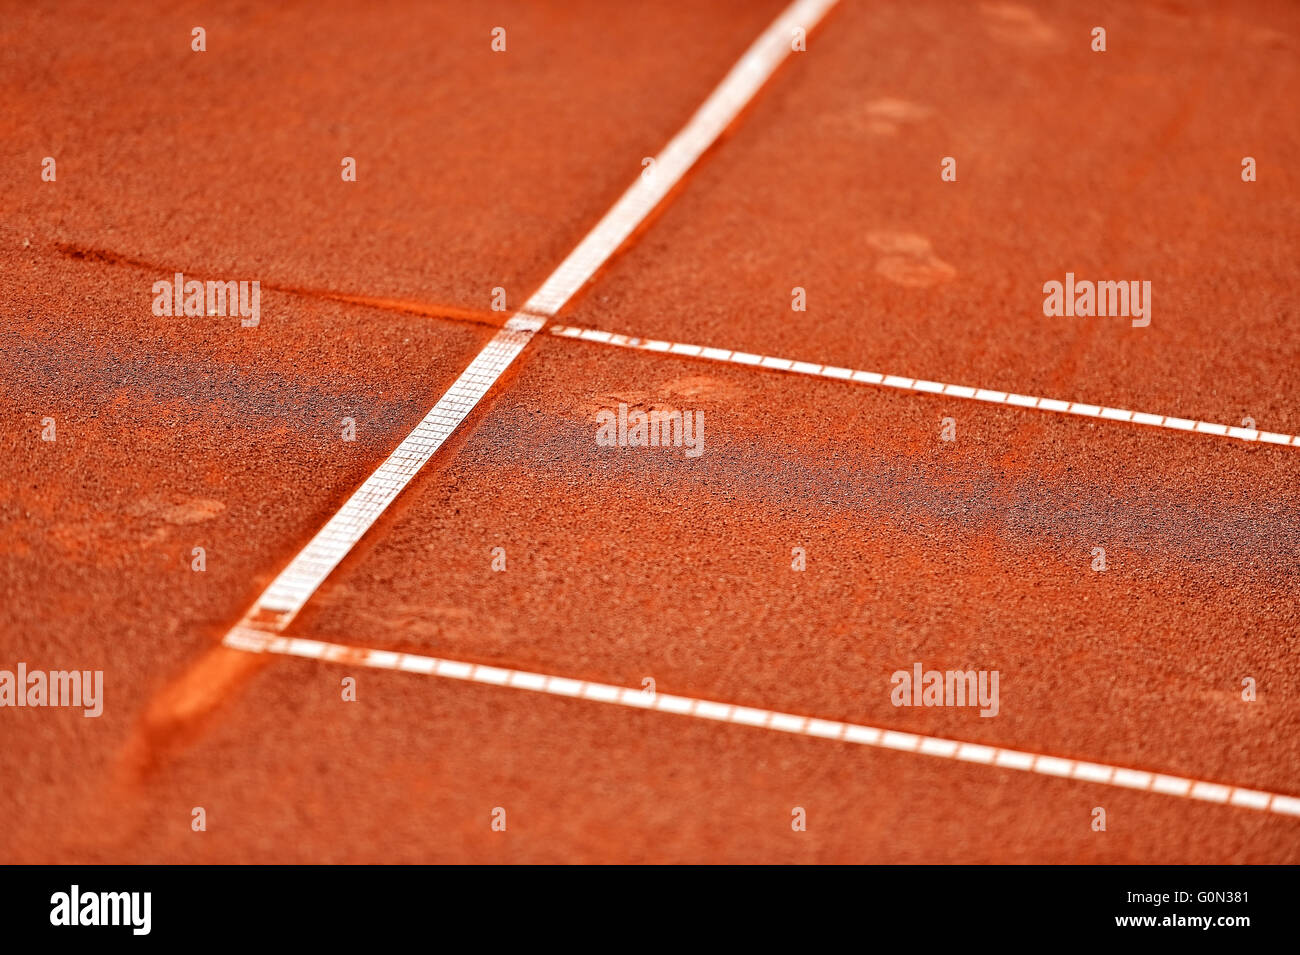 Detail with a baseline footprint on a tennis clay court Stock Photo